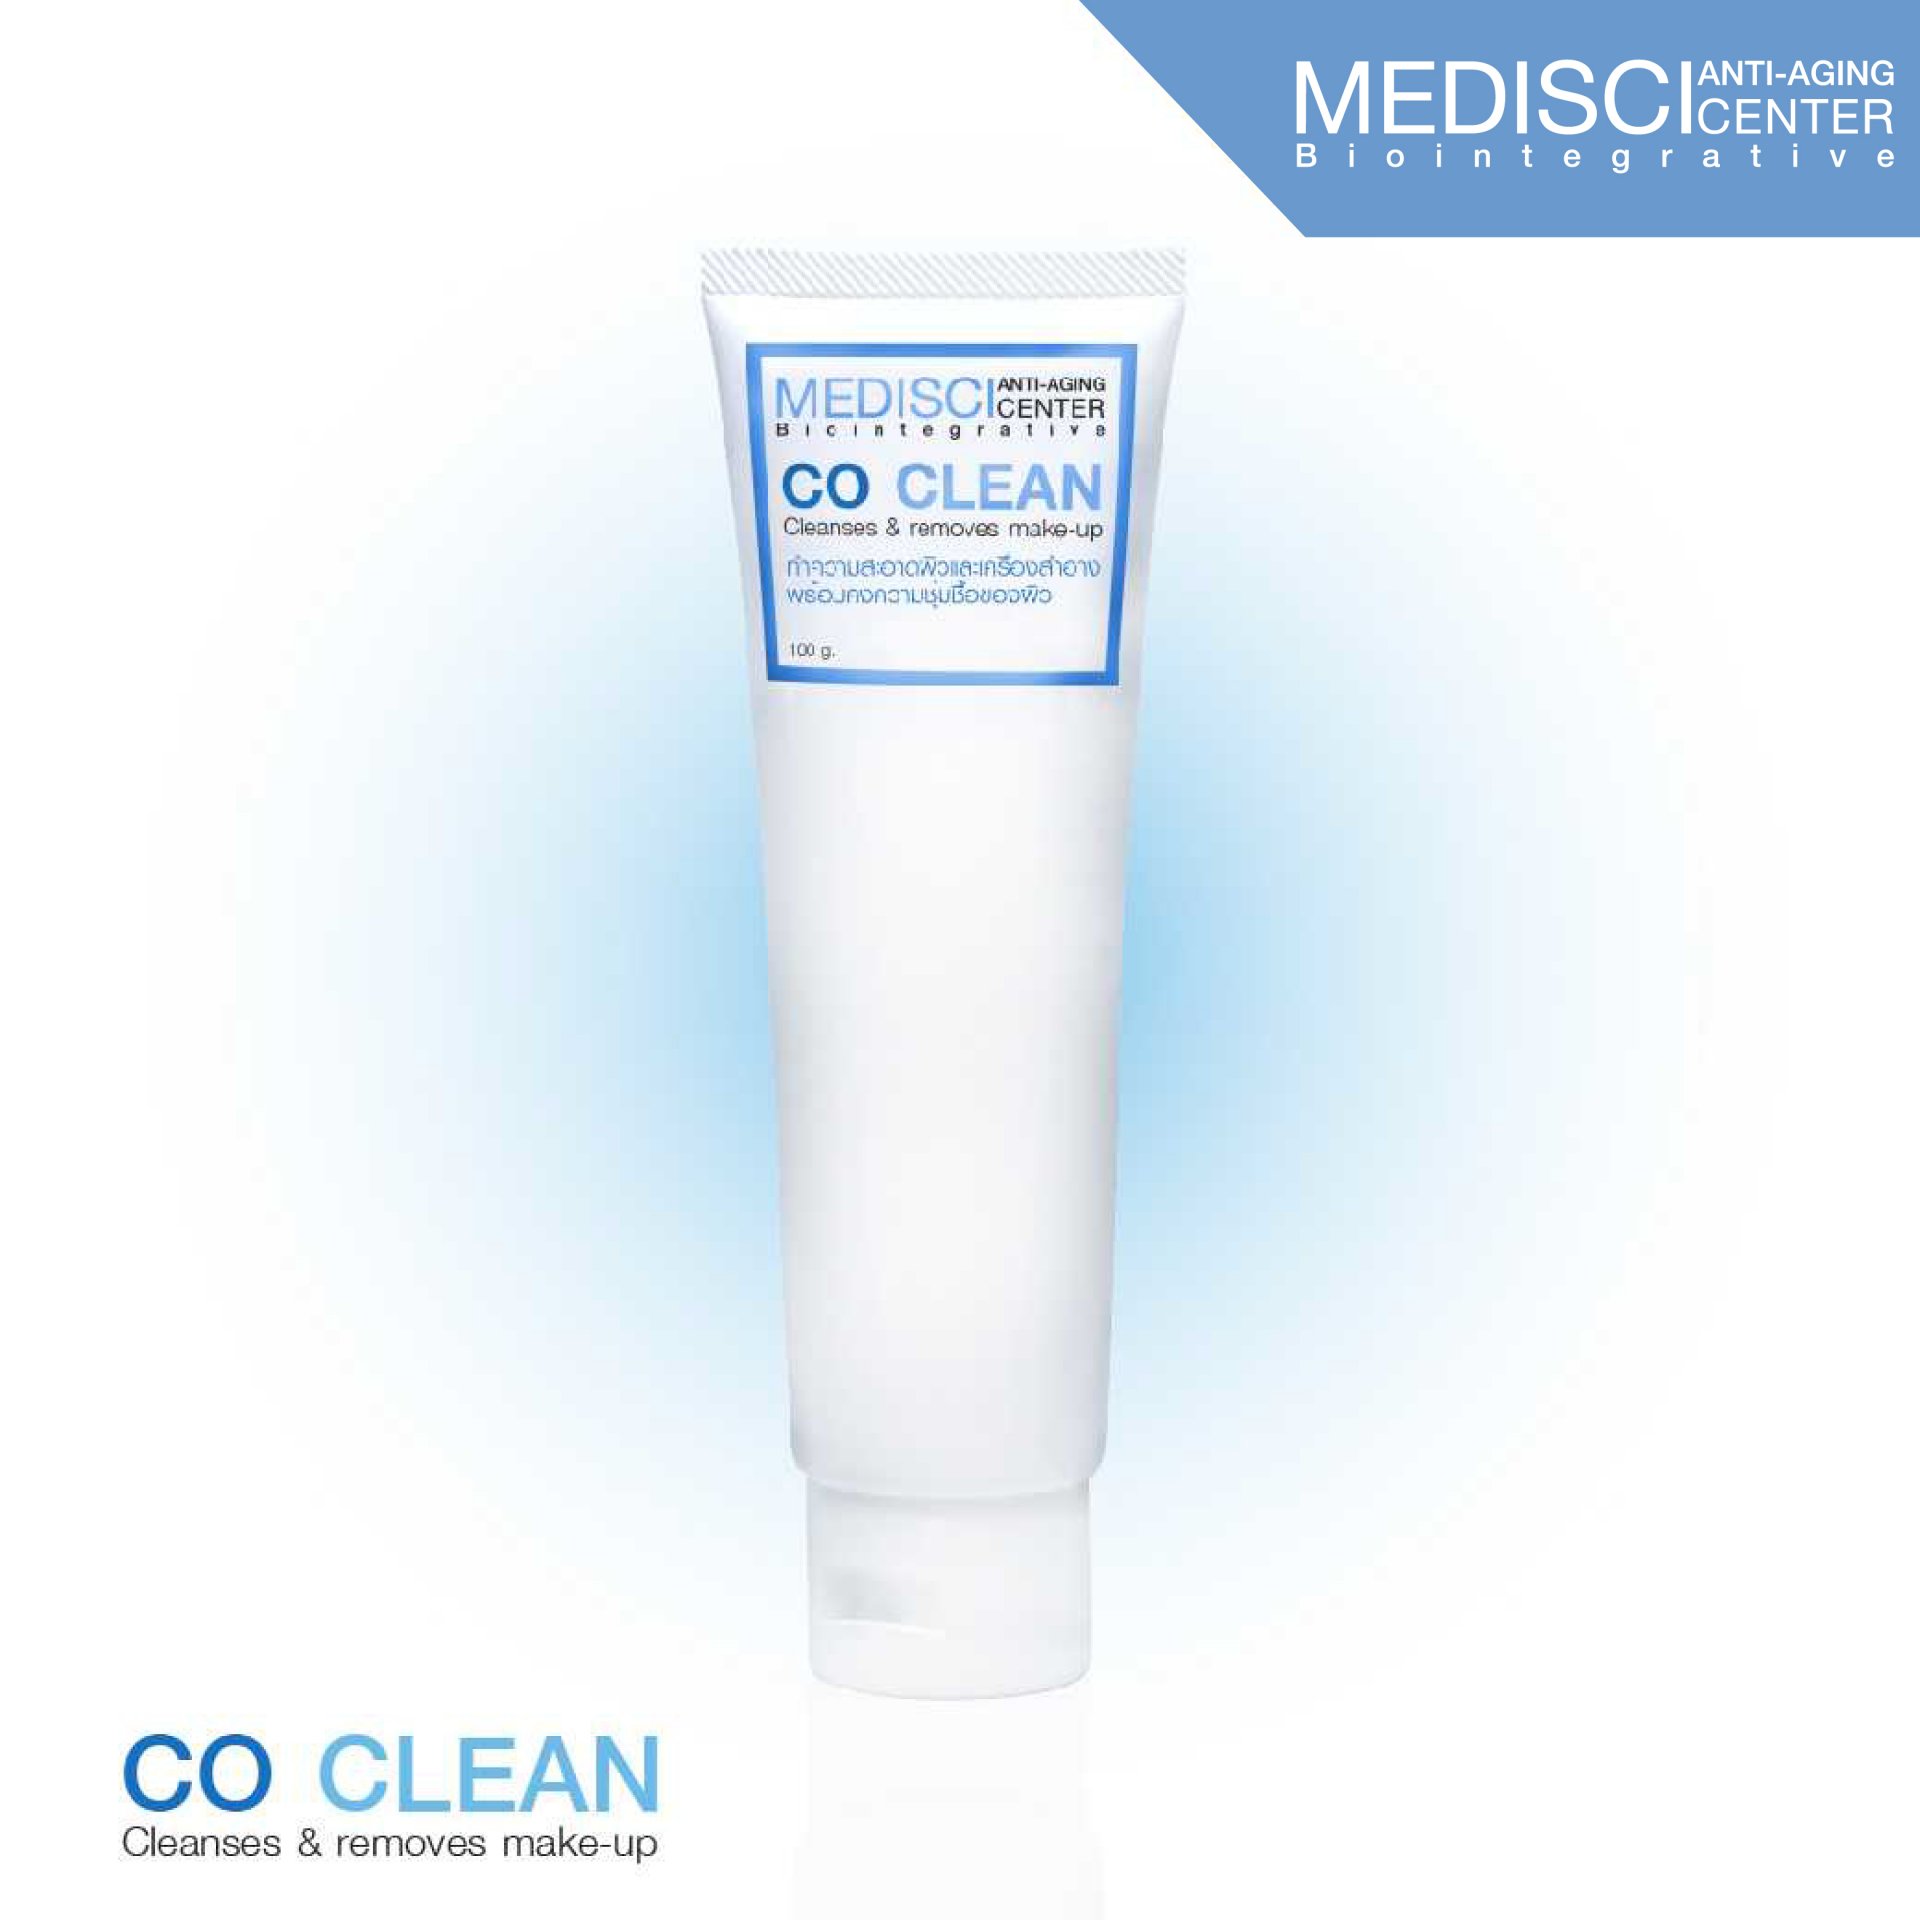 CO CLEAN (Cleanses & removes make-up)